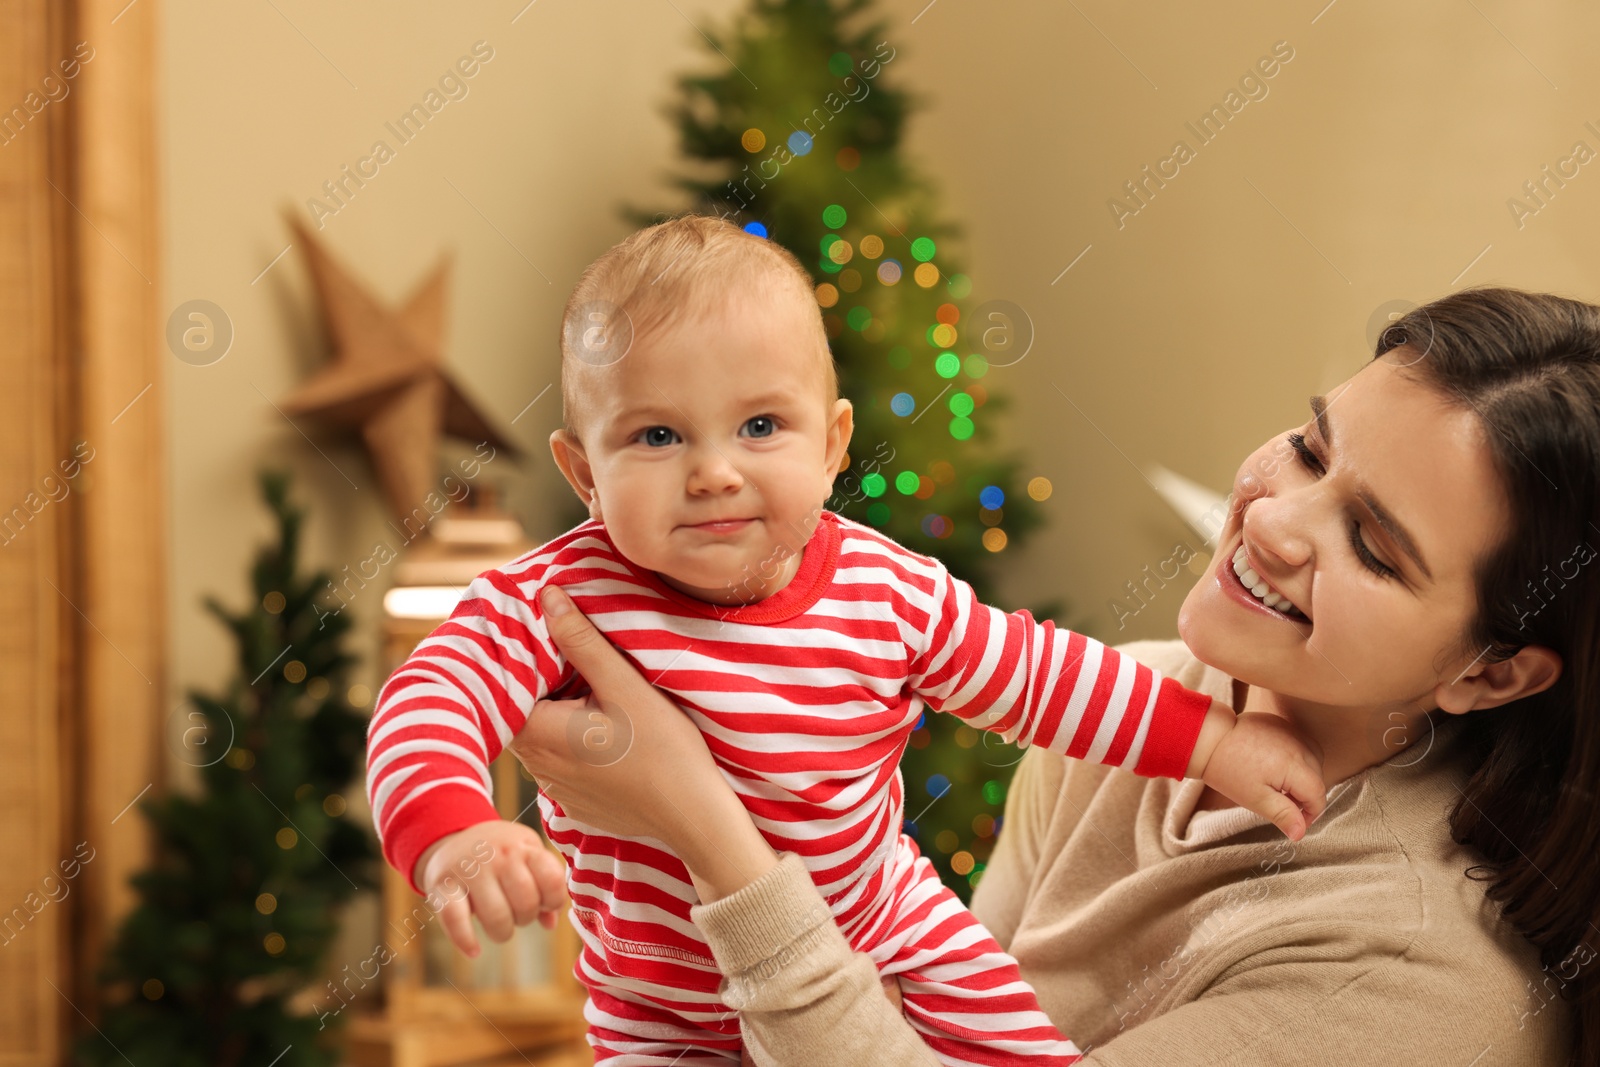 Photo of Happy you mother with her cute baby in room decorated for Christmas. Winter holiday